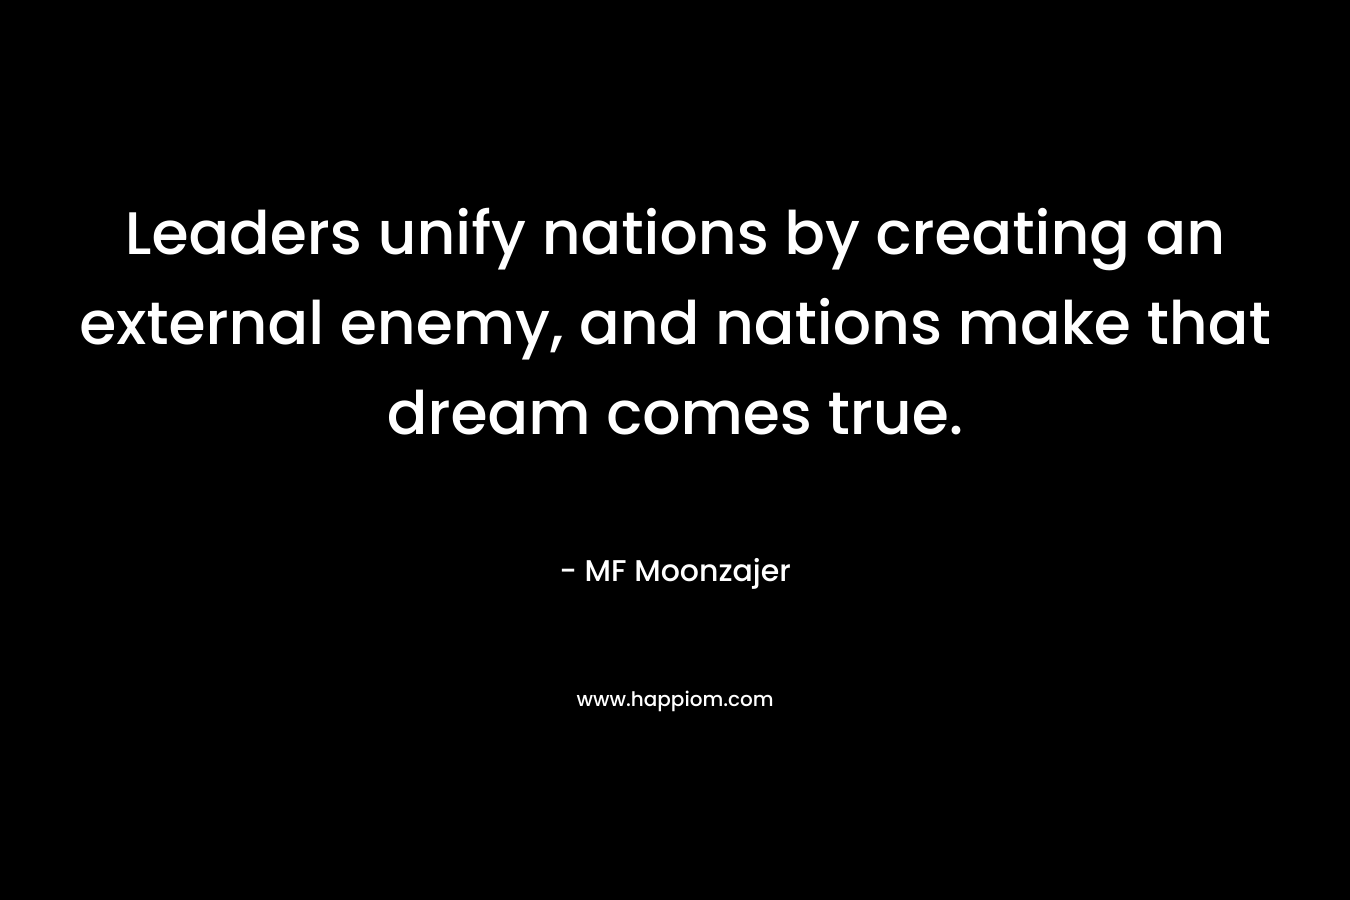 Leaders unify nations by creating an external enemy, and nations make that dream comes true.